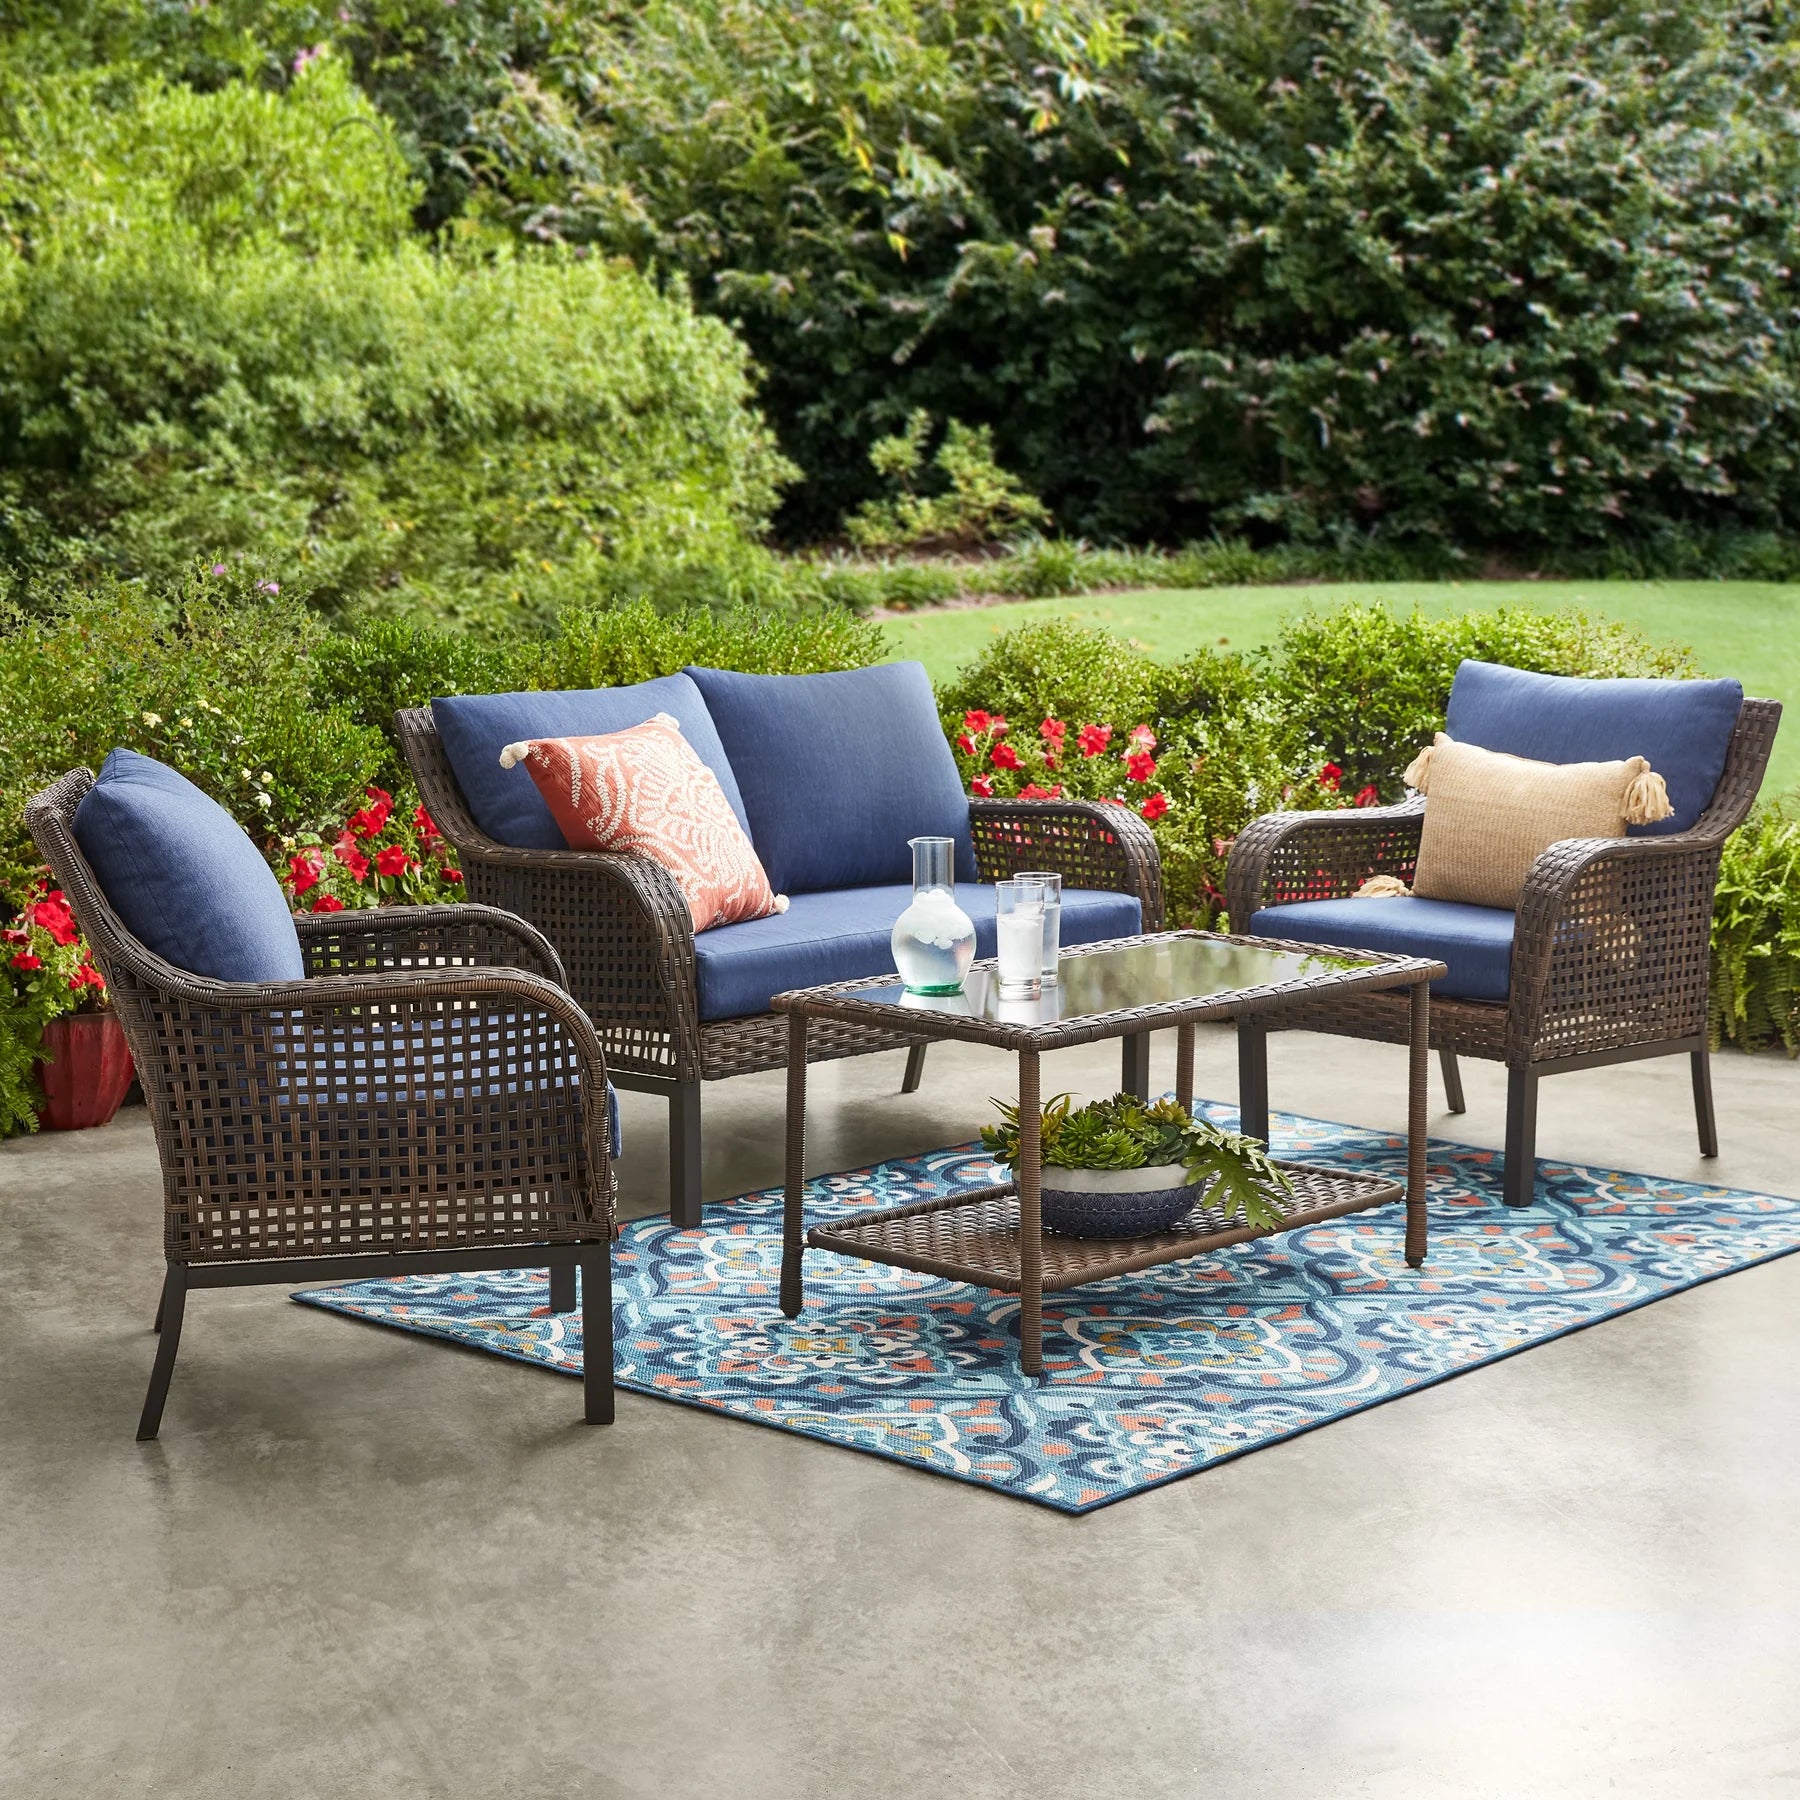 EVELINE OUTDOOR SOFA SET 2 SEATER, 2 SINGLE SEATER AND 1 CENTER TABLE